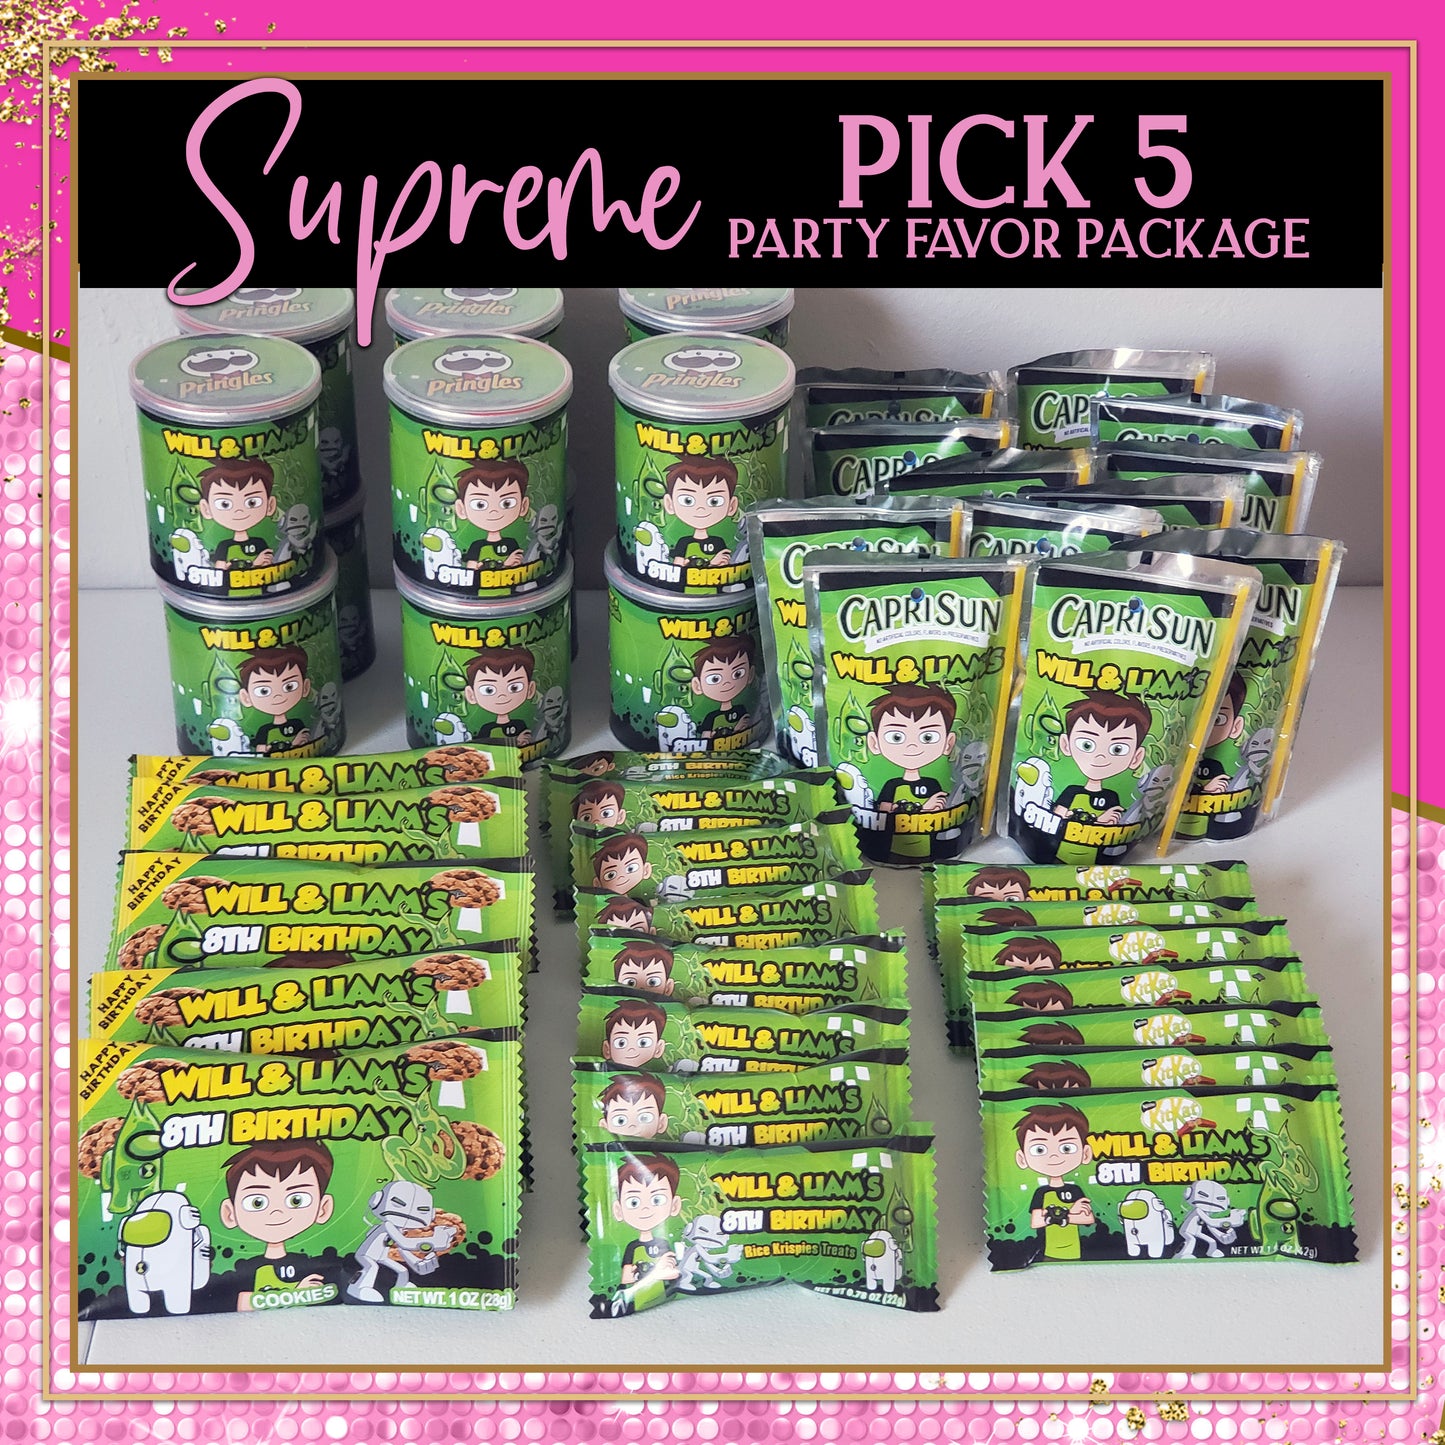 SUPREME Package (PICK 5 PARTY FAVORS)